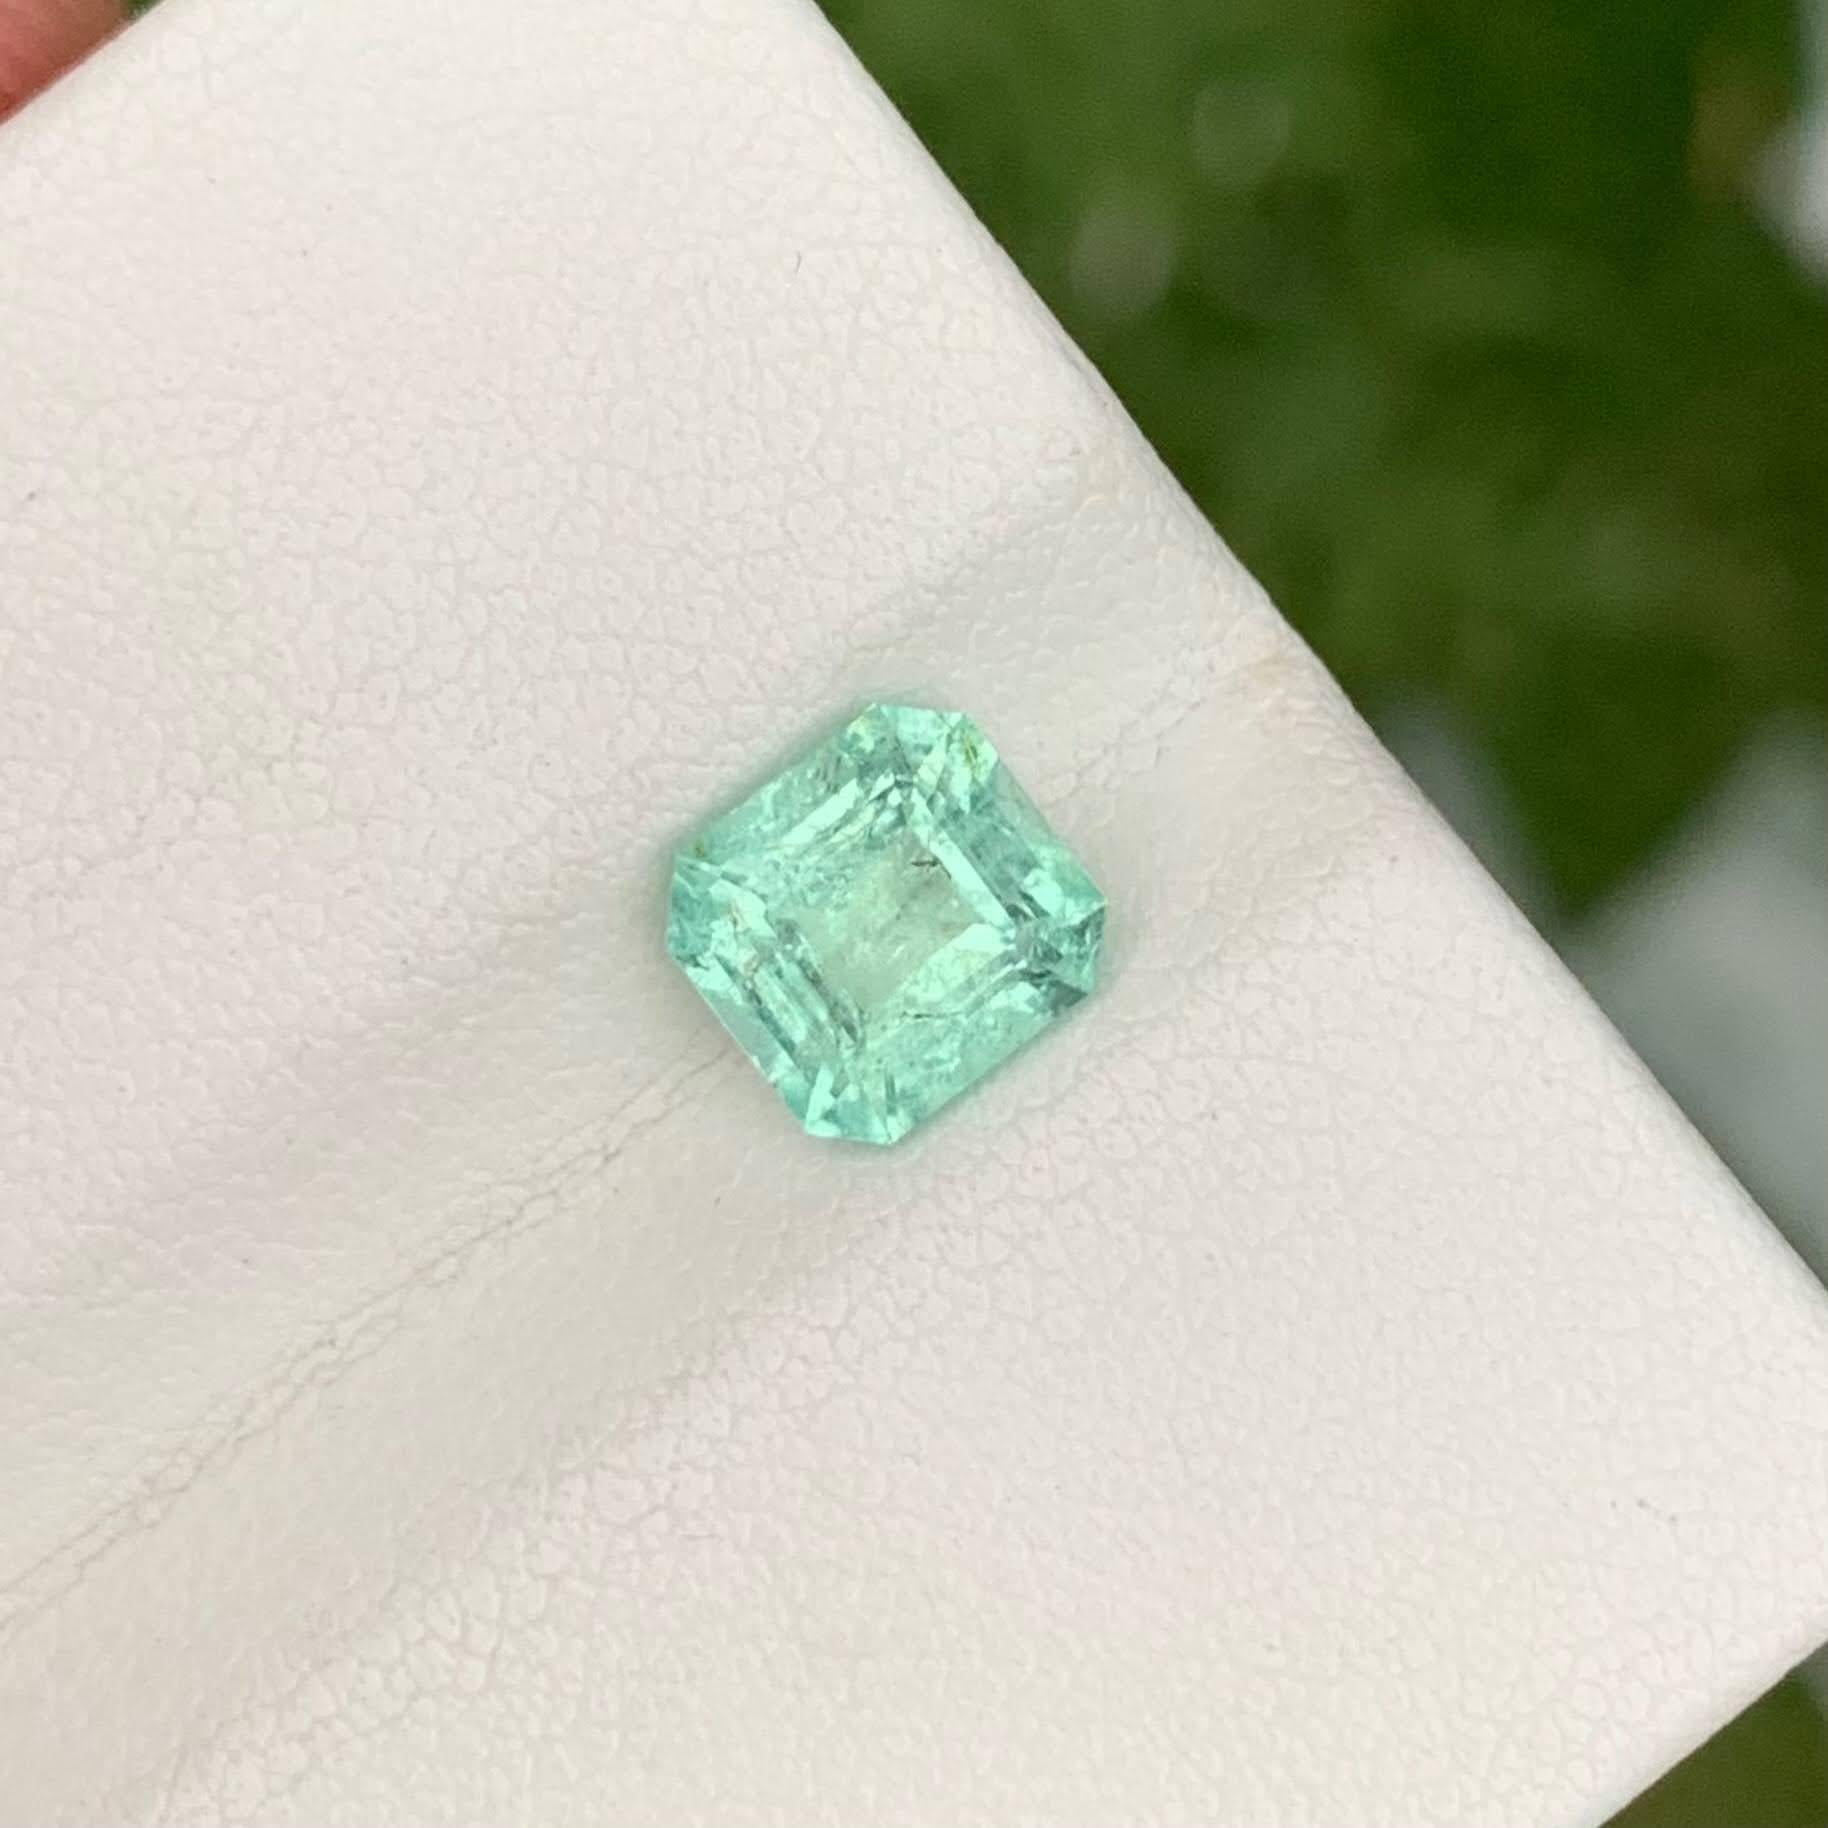 Modern 1.35 Carats Loose Emerald Stone Emerald Cut Natural Gemstone From Afghanistan For Sale